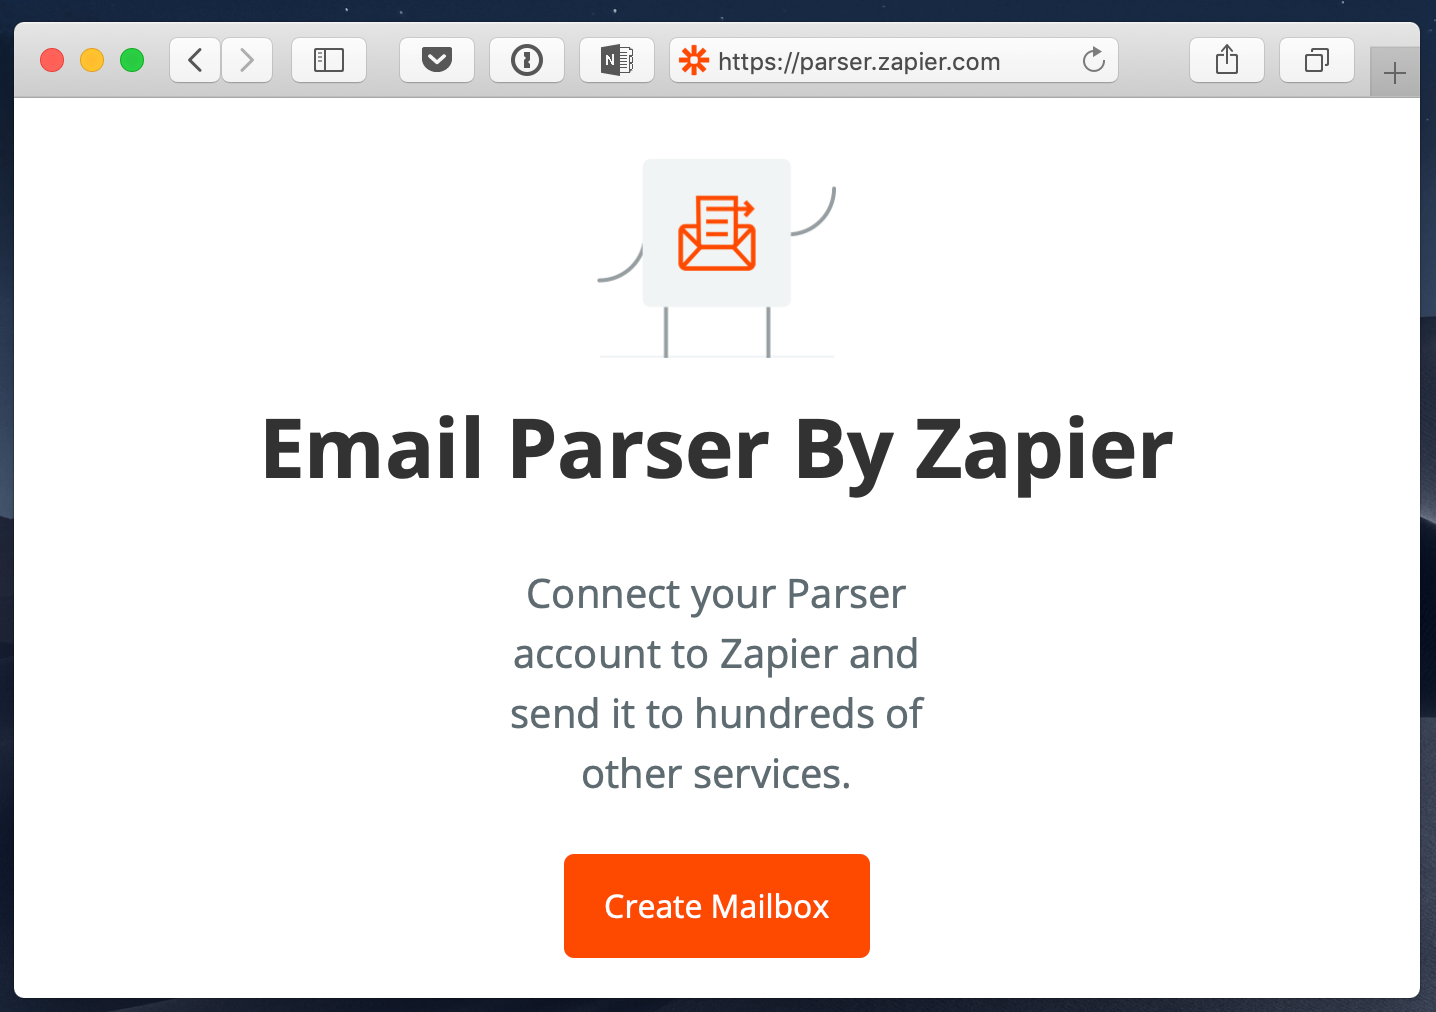 Home screen of Email Parser by Zapier